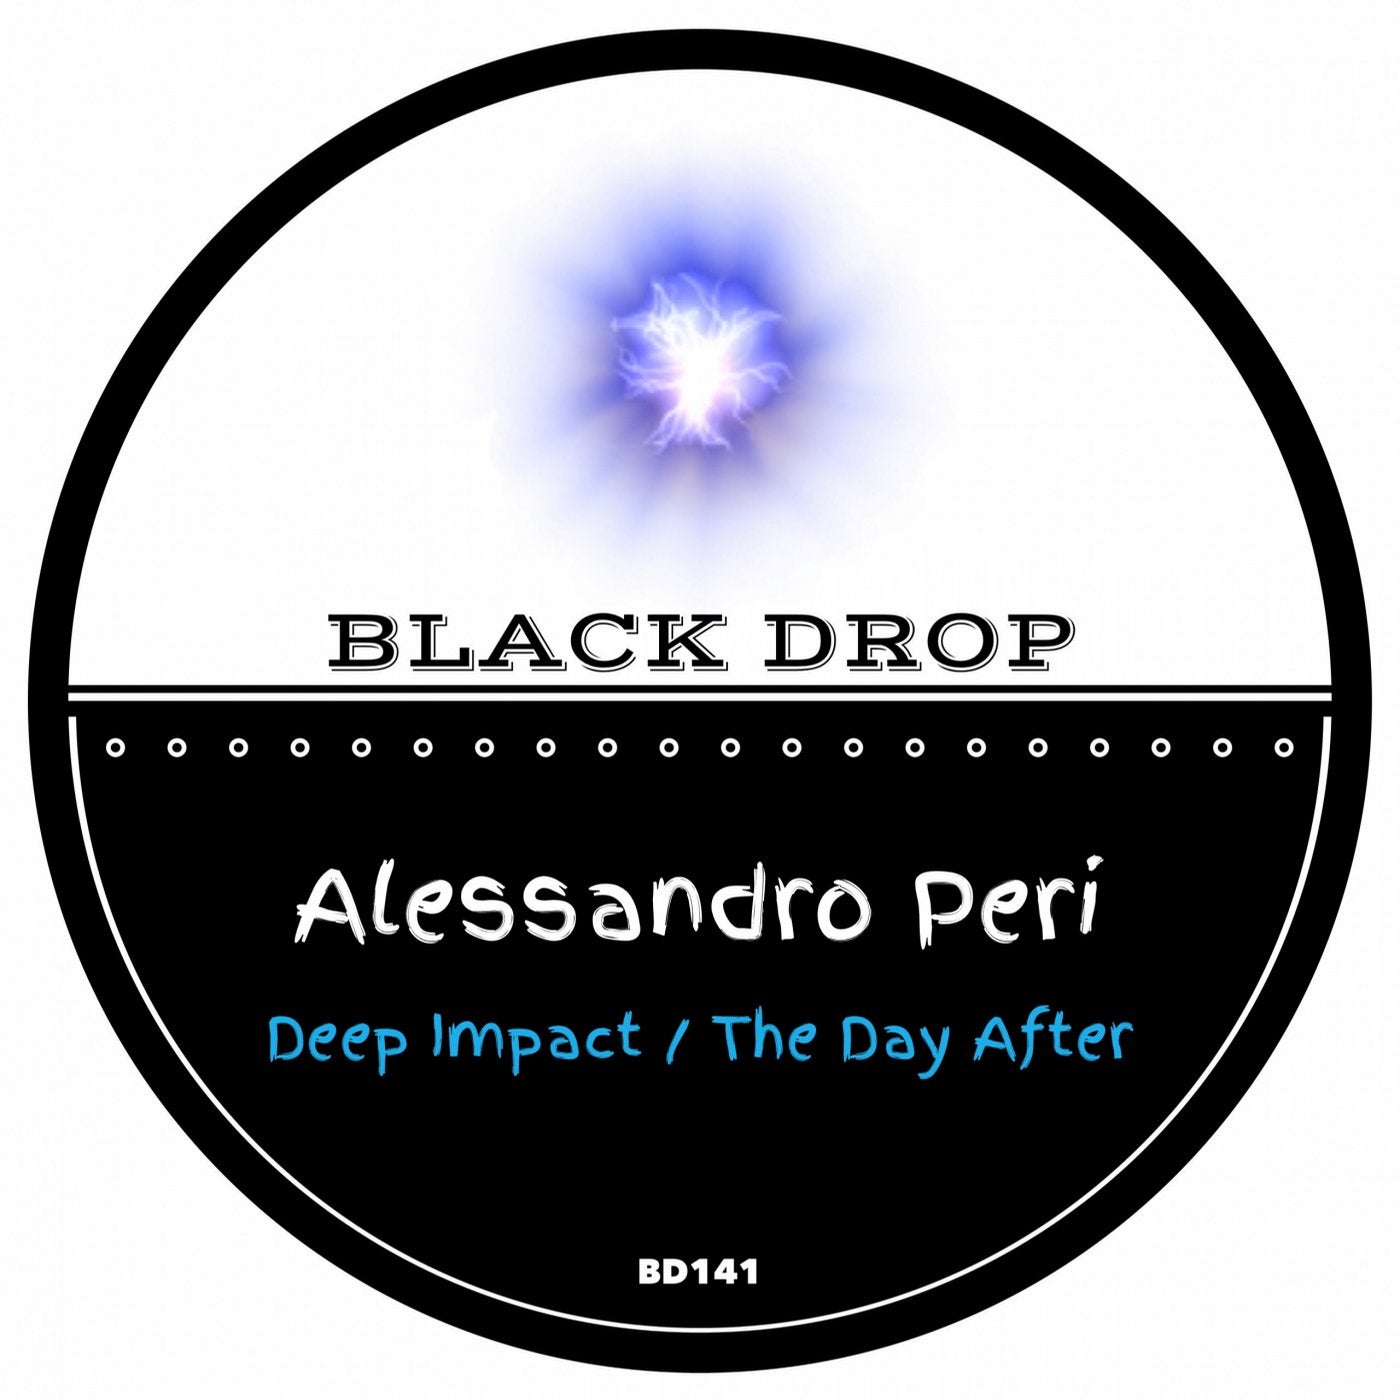 Deep Impact / The Day After